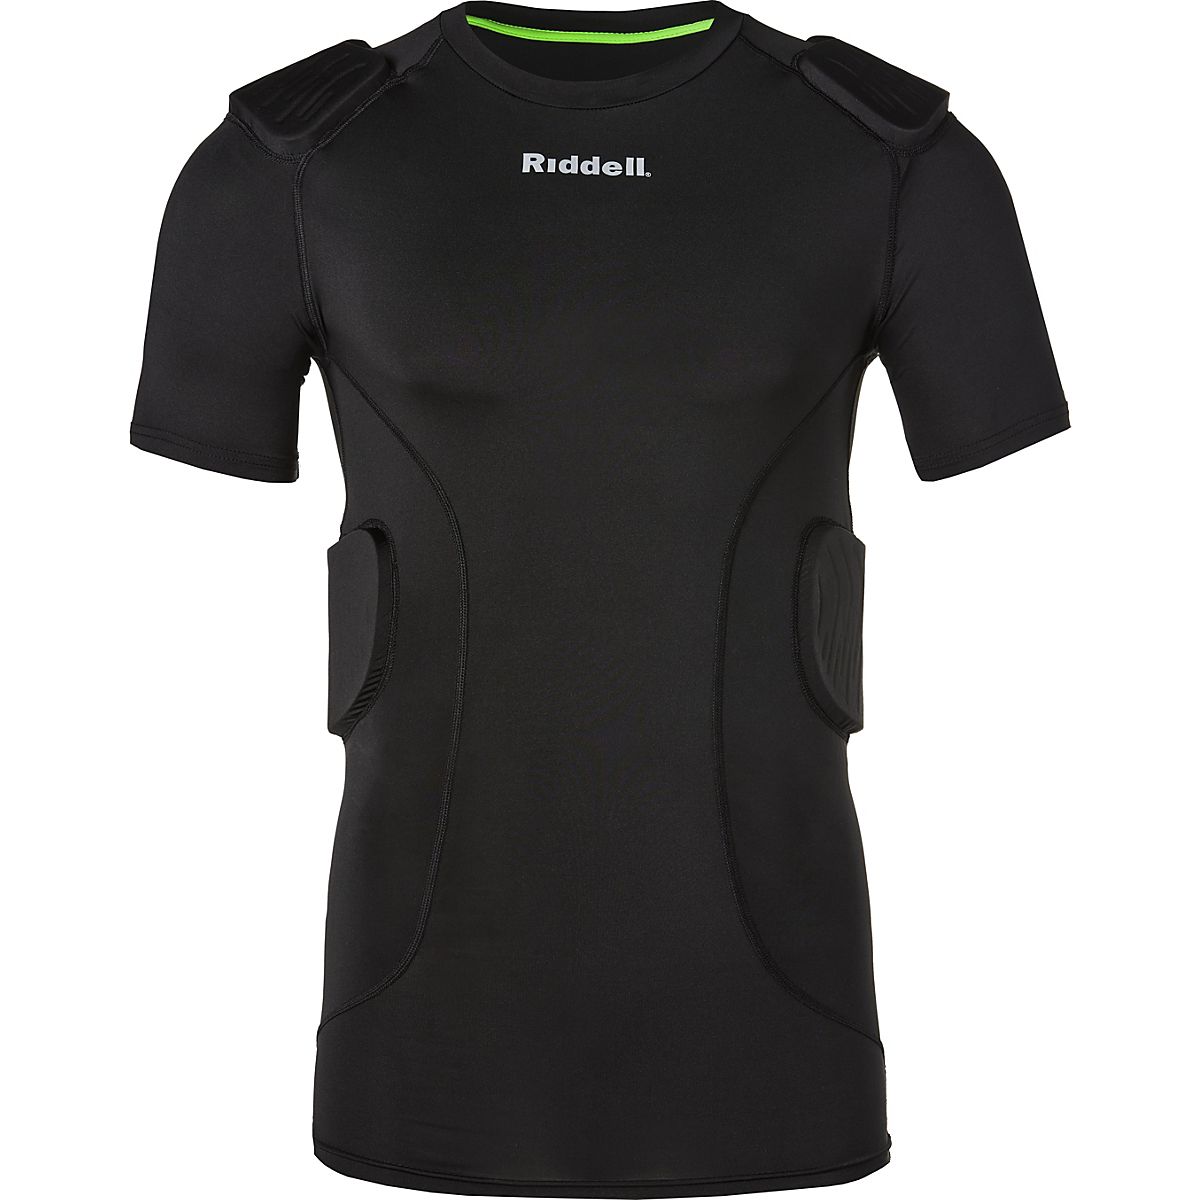 Riddell Power Padded Shirt Youth (RTPTPCY) - Forelle Teamsports